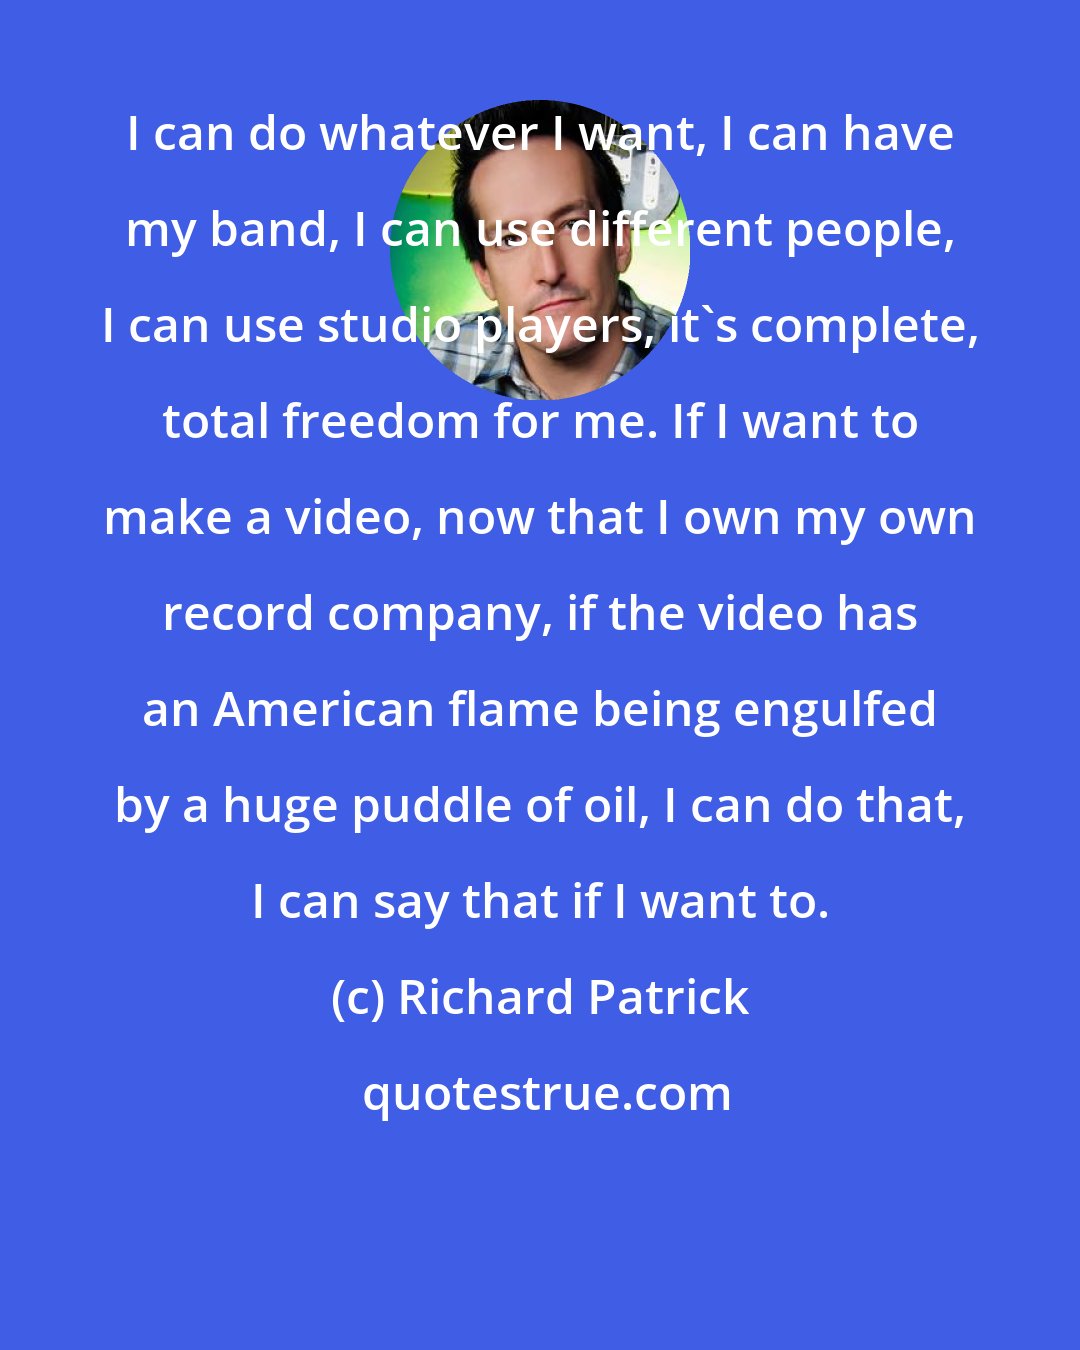 Richard Patrick: I can do whatever I want, I can have my band, I can use different people, I can use studio players, it's complete, total freedom for me. If I want to make a video, now that I own my own record company, if the video has an American flame being engulfed by a huge puddle of oil, I can do that, I can say that if I want to.